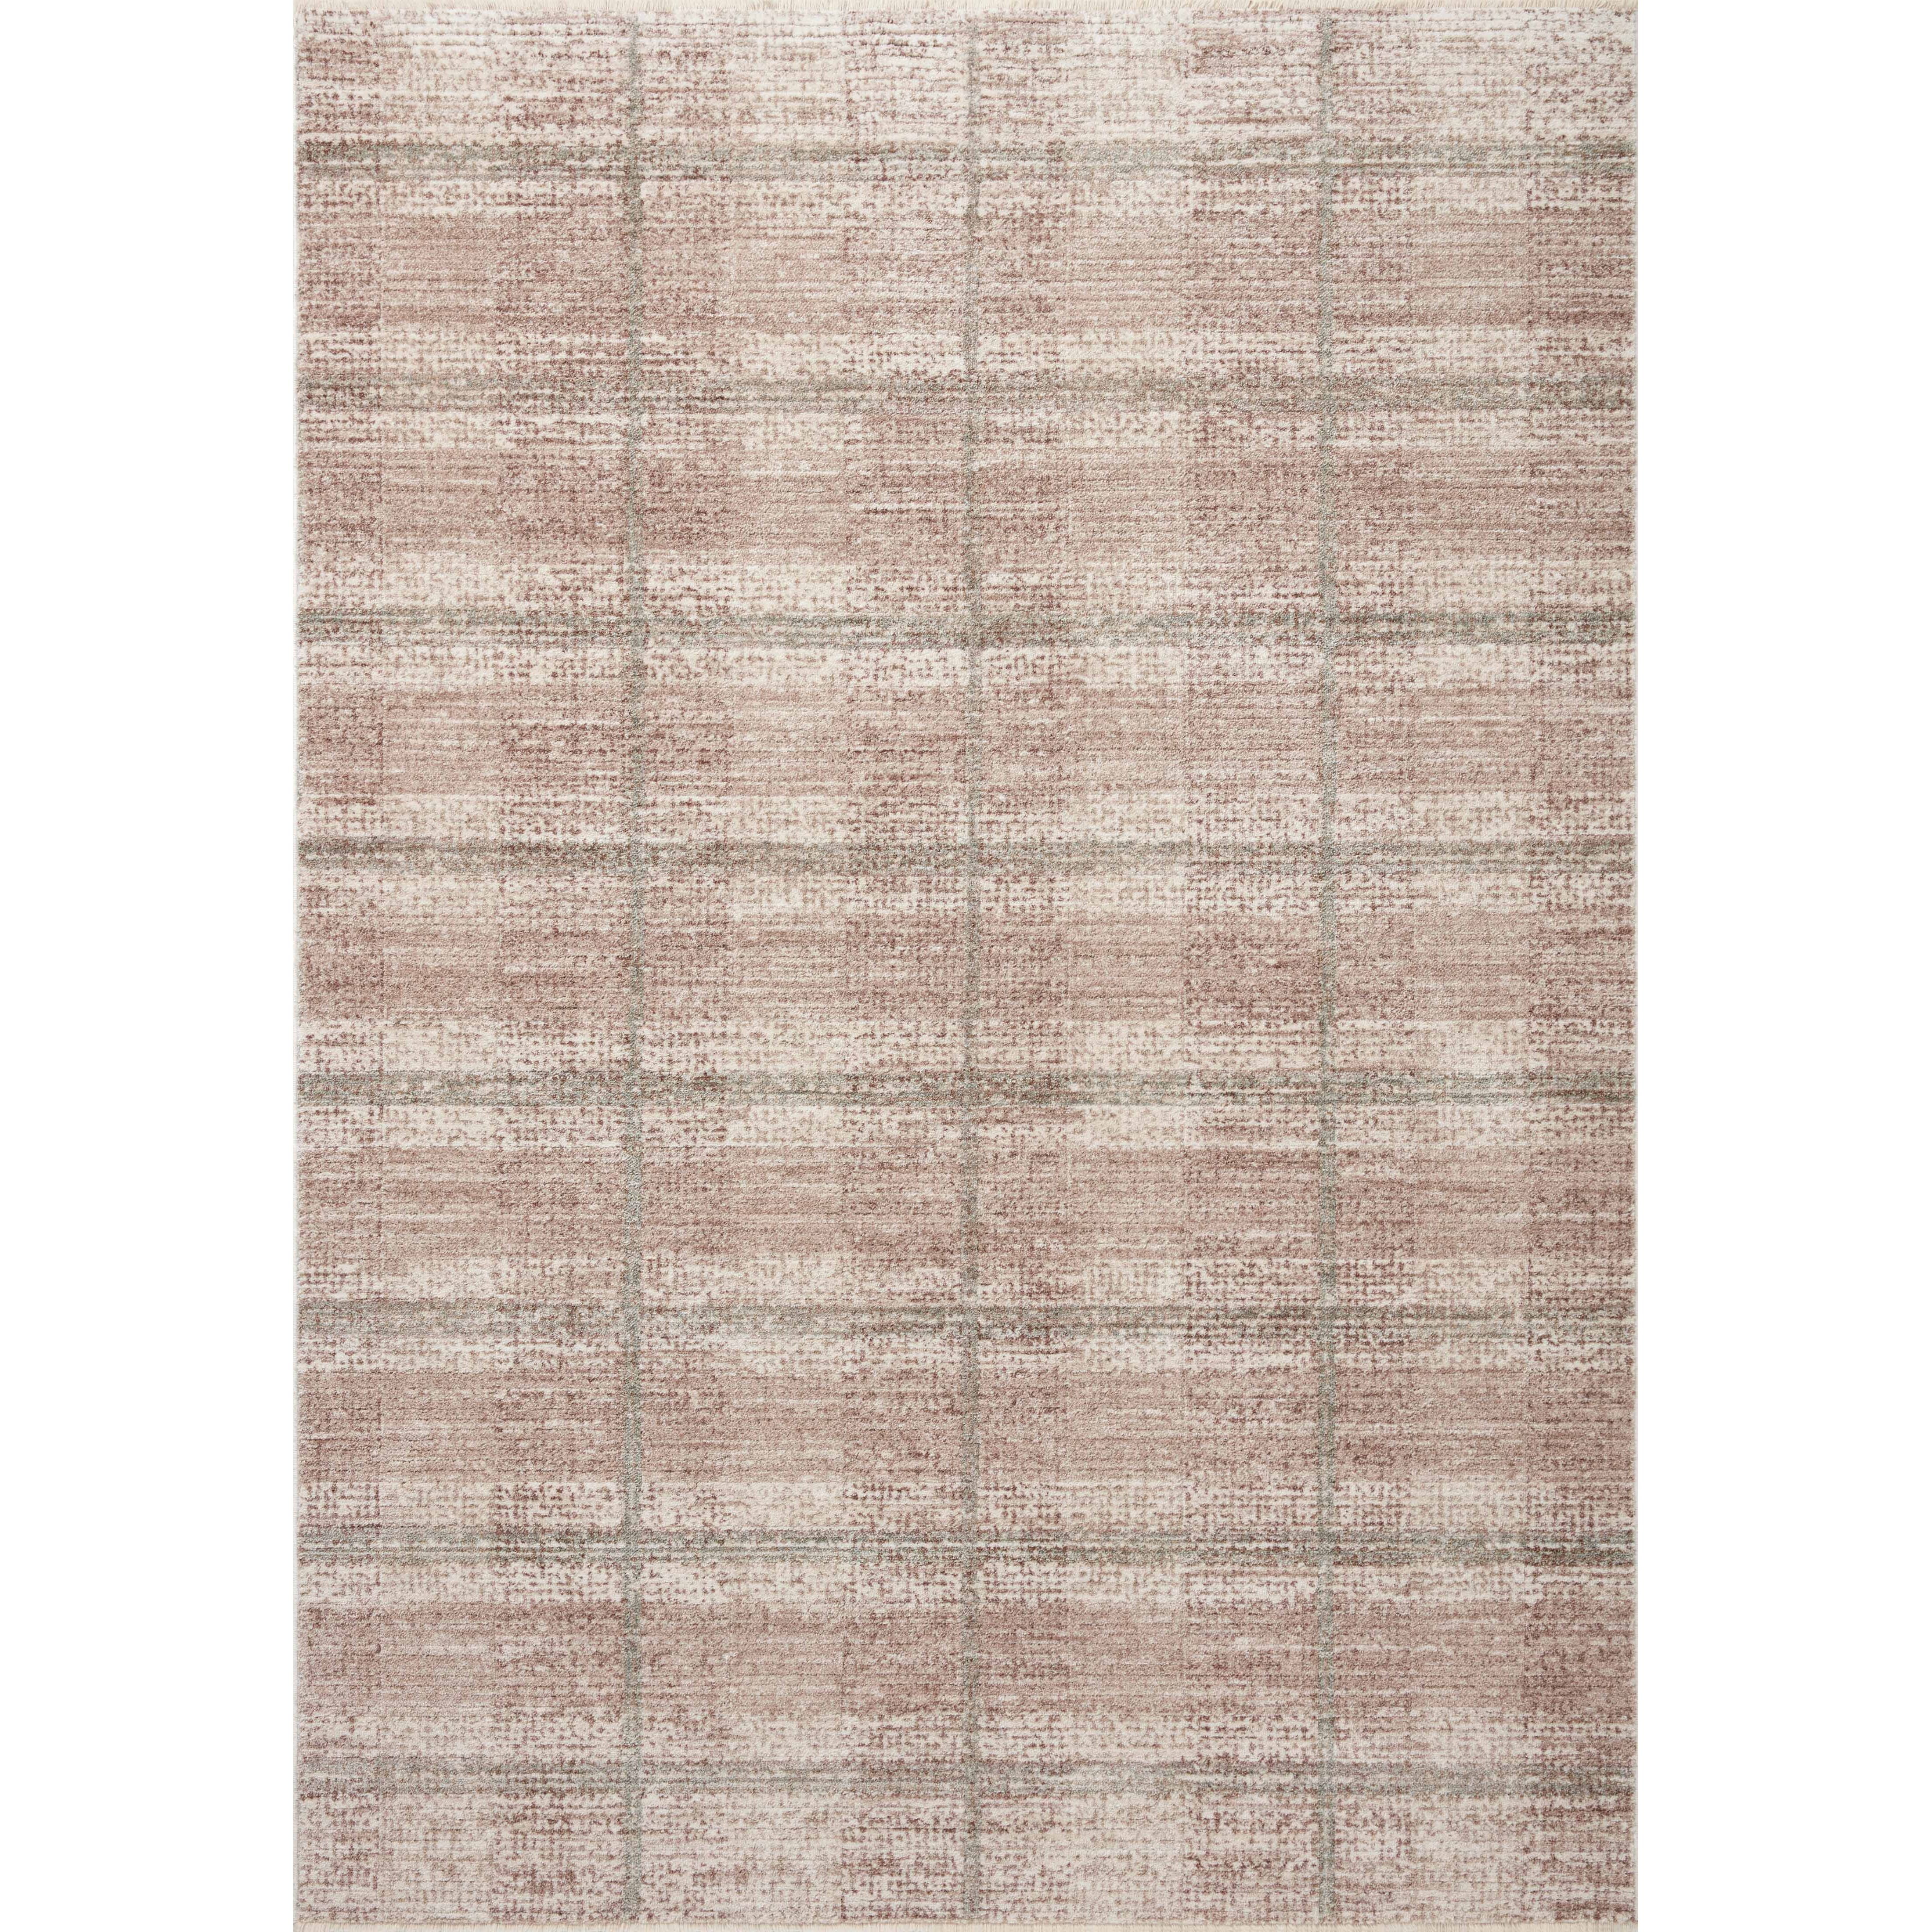 The Ember Collection by Angela Rose x Loloi is a modern flatweave area rug with a timeless plaid pattern that adds depth and coziness to any living room, bedroom, dining room, or hallway. Ember is power-loomed of 100% space-dyed polyester, a durable construction that creates a nuanced depth of color, available in a range of neutral palettes. Amethyst Home provides interior design, new home construction design consulting, vintage area rugs, and lighting in the Salt Lake City metro area.